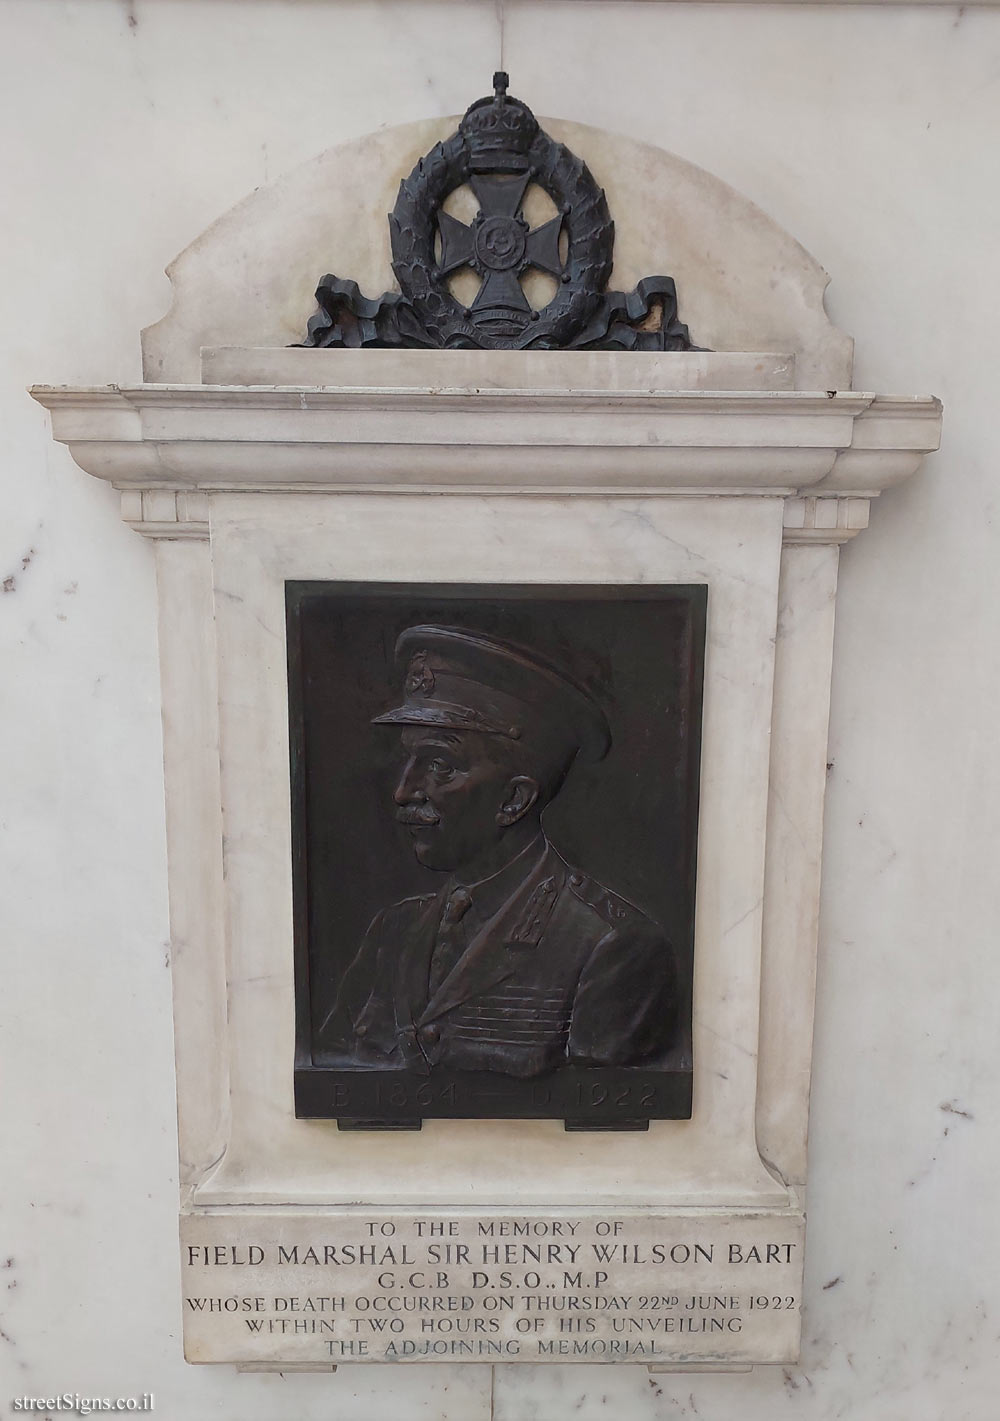 London - Liverpool Station - Memorial plaque to Sir Henry Wilson